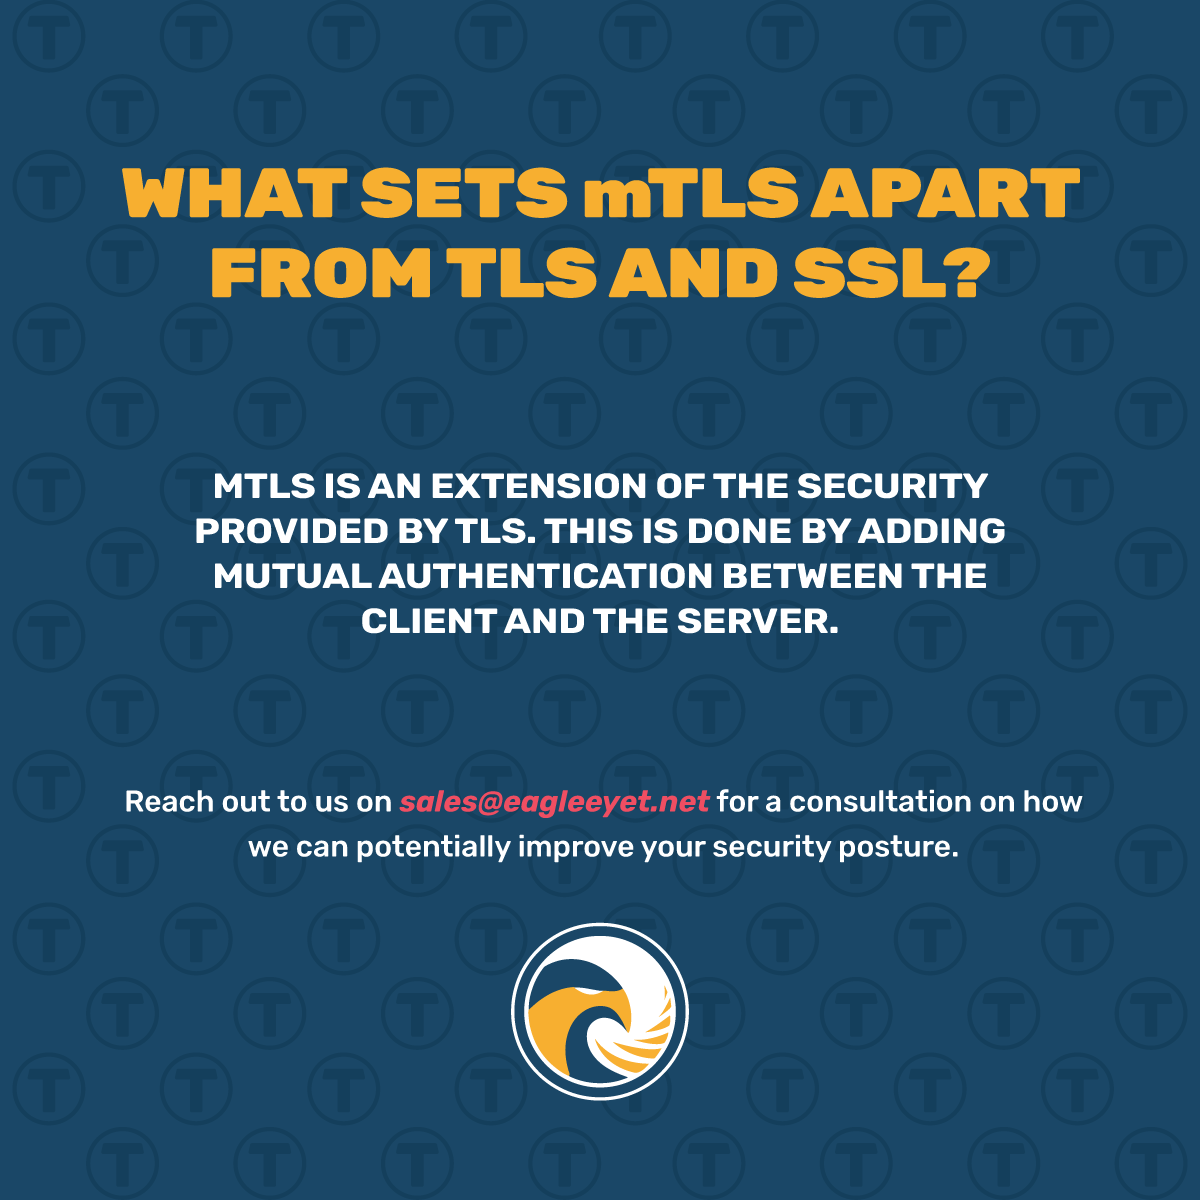 Eagle-Eye-T-Banner-What-Sets-mTLS-Apart-From-TLS-and-SSL